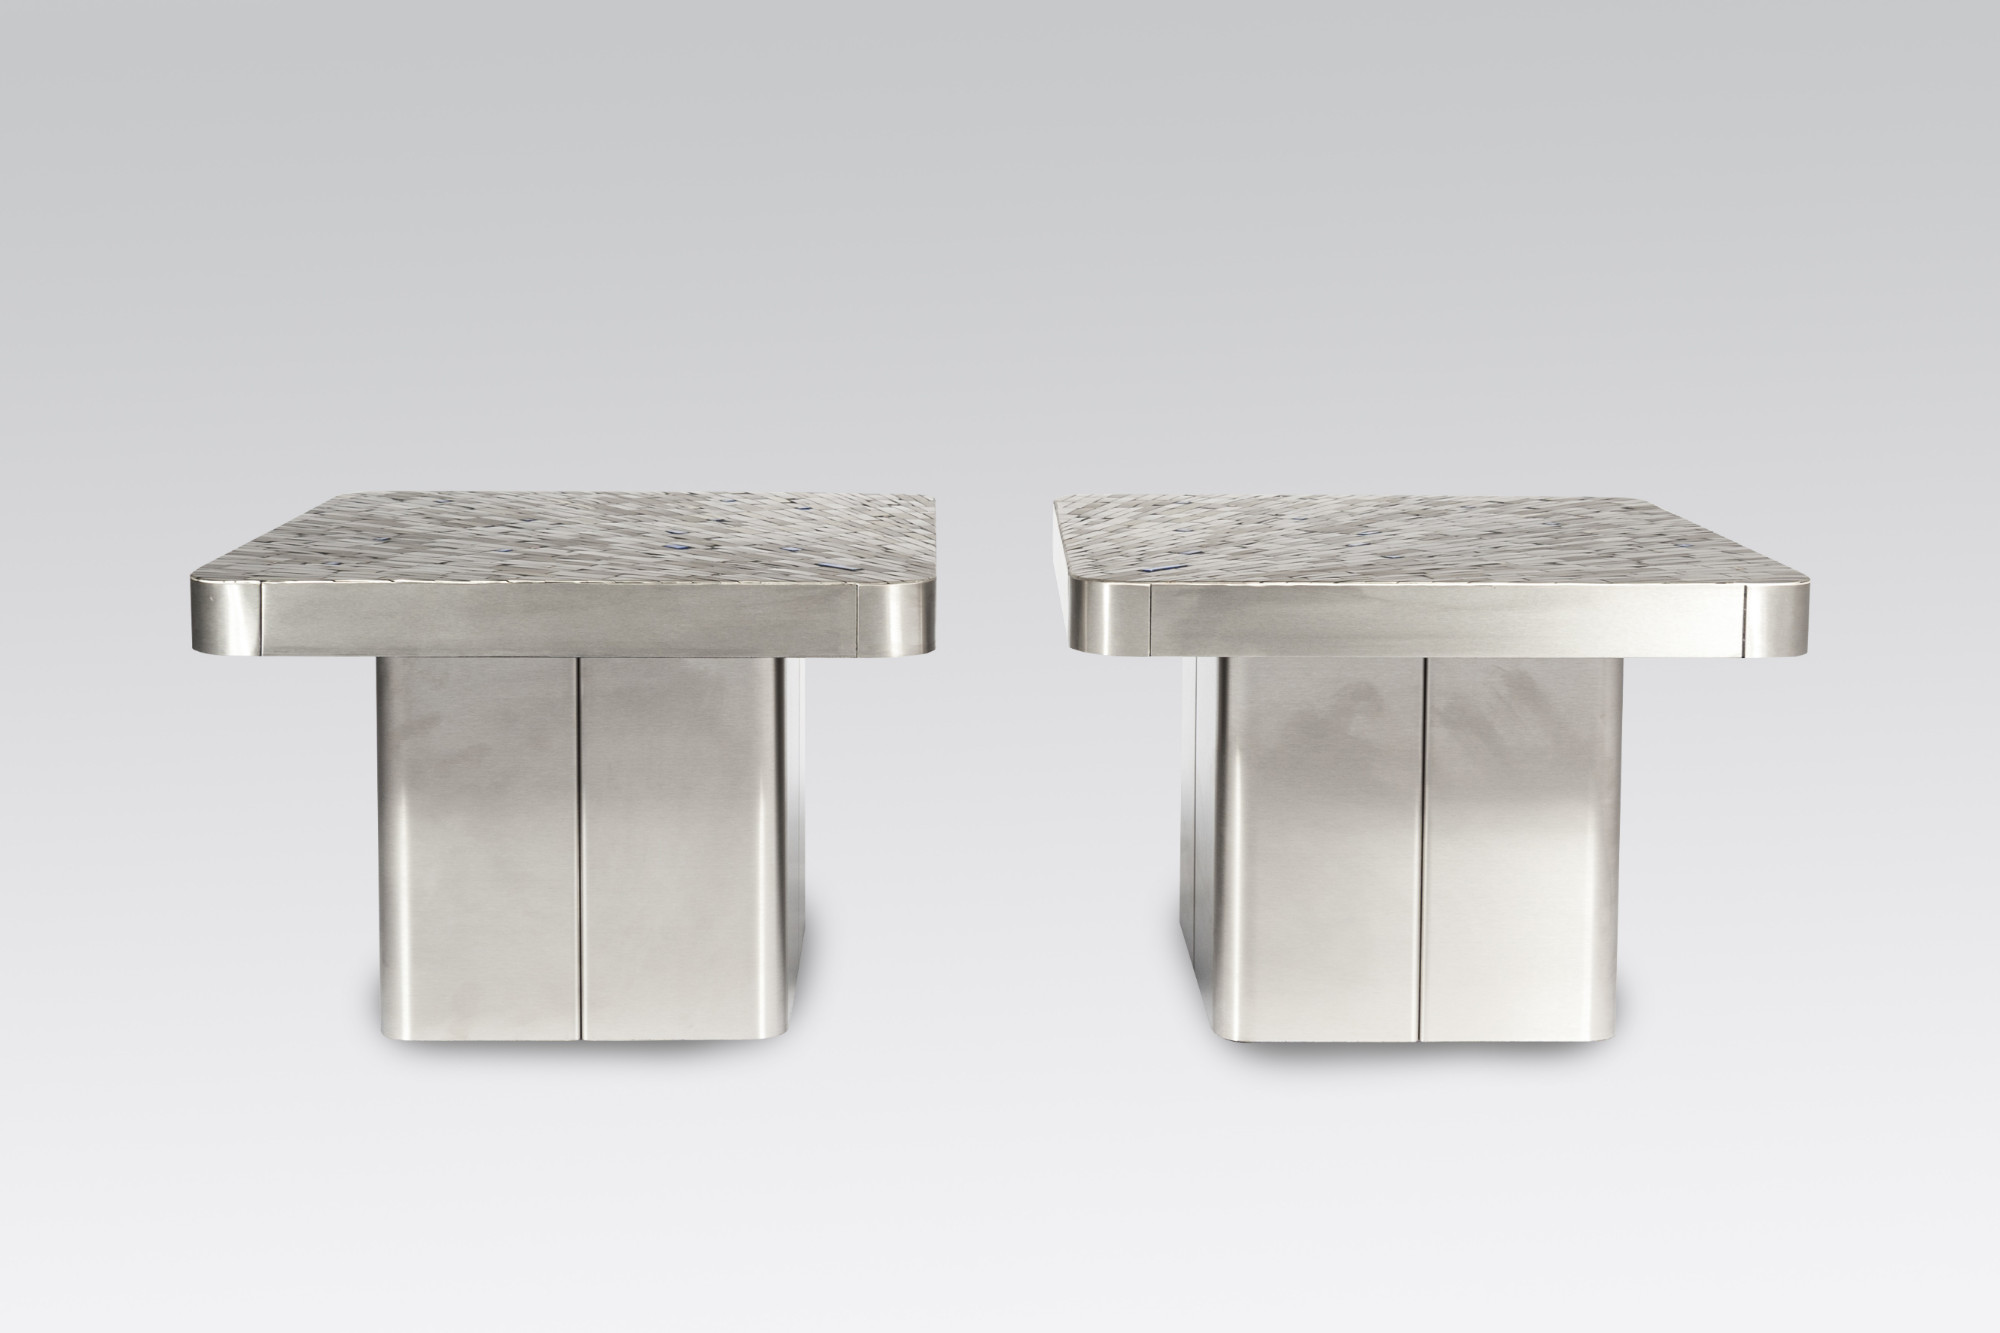 Pair of side table mosaic stainless steel and lapis lasuli by Stan Usel